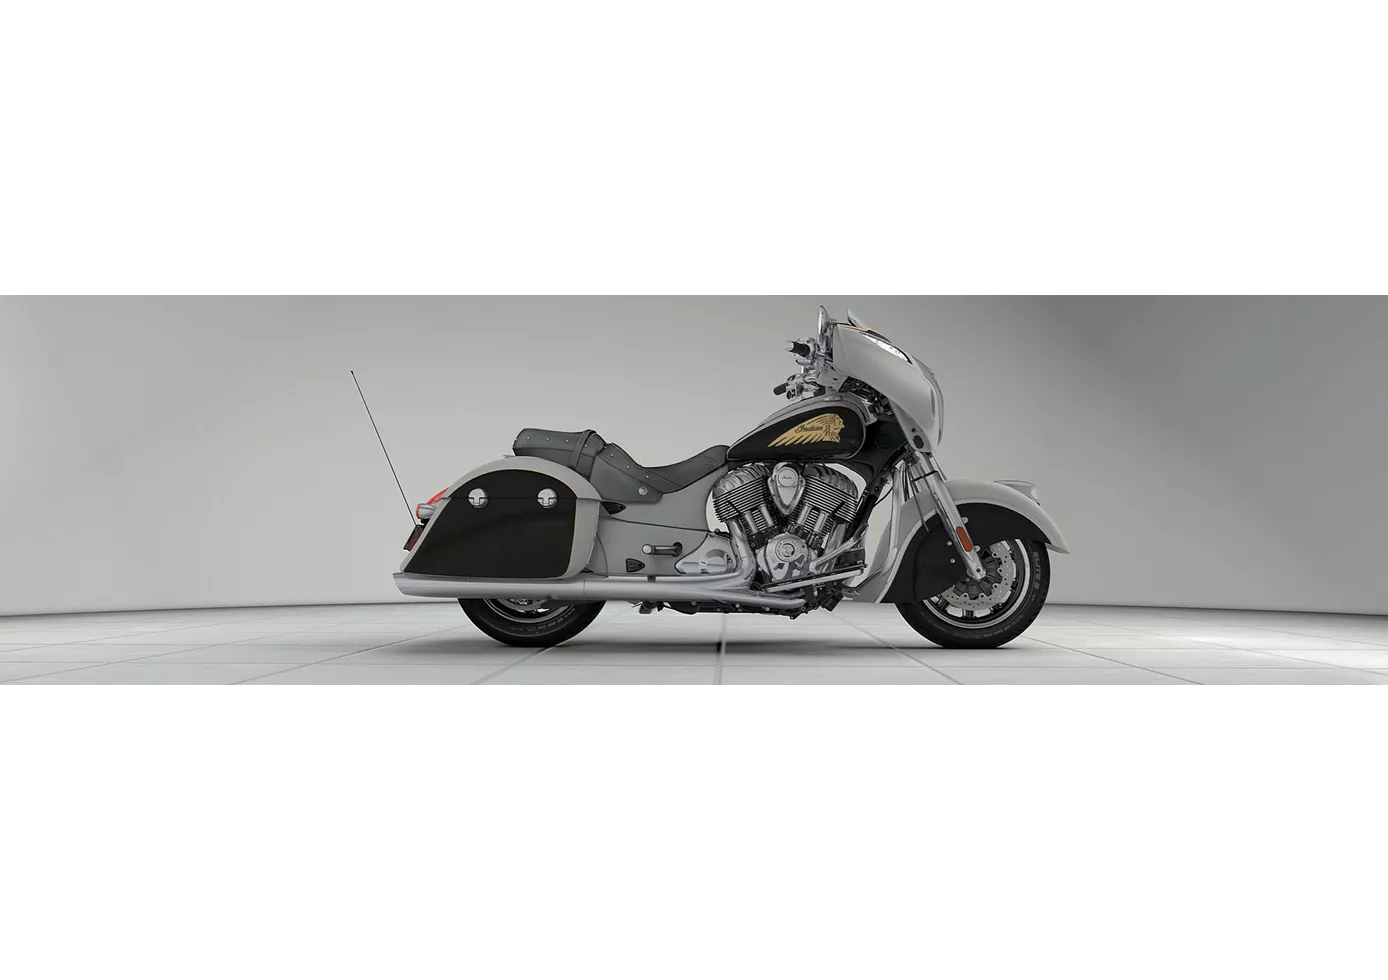 Indian Chieftain 2019